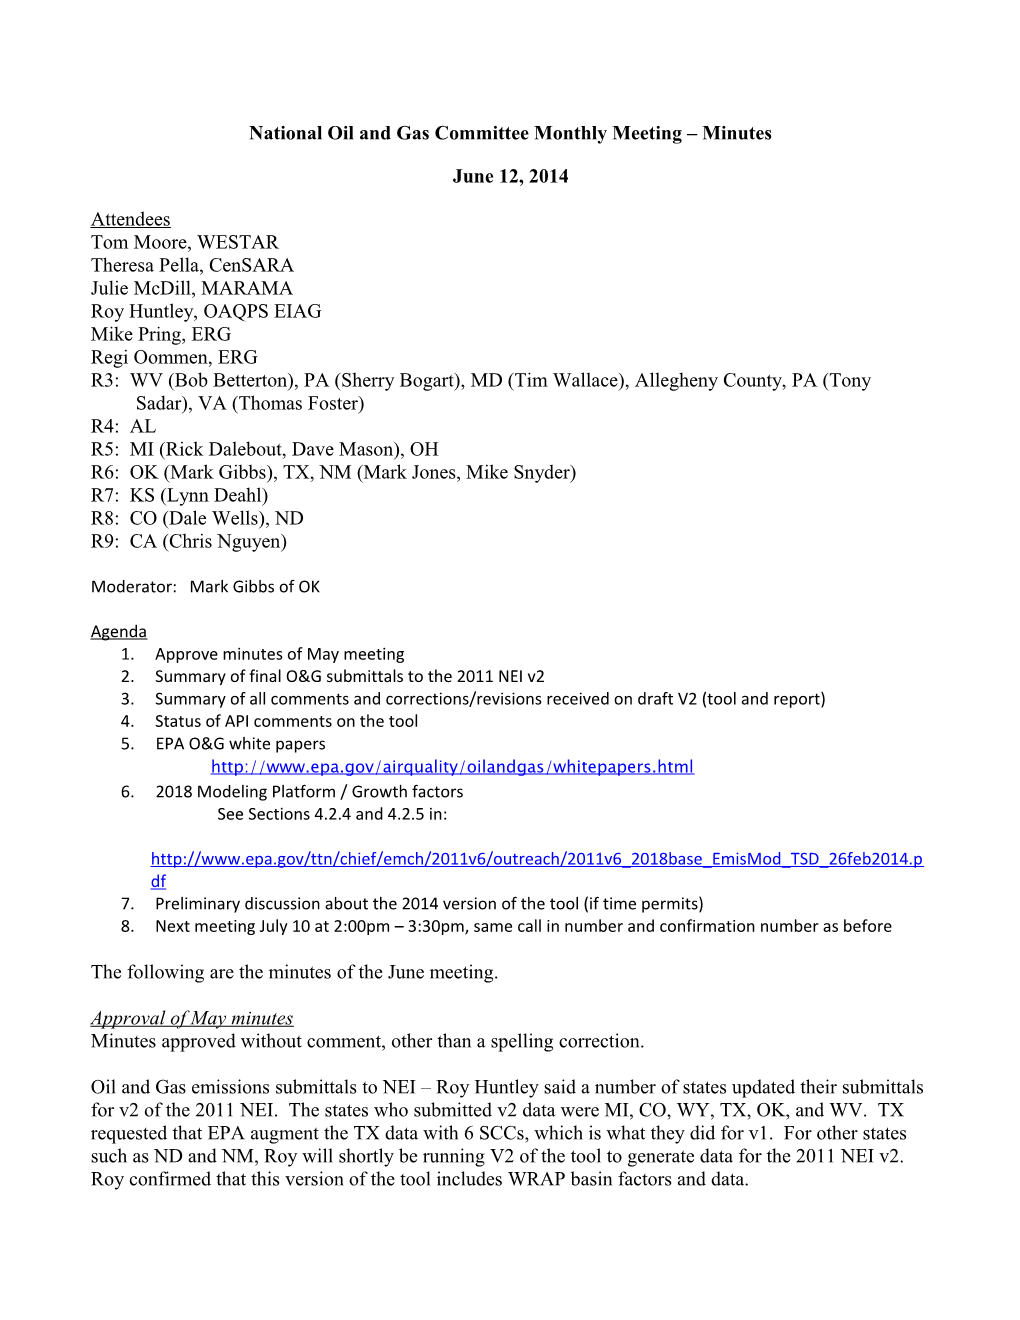 National Oil and Gas Committeemonthly Meeting Minutes